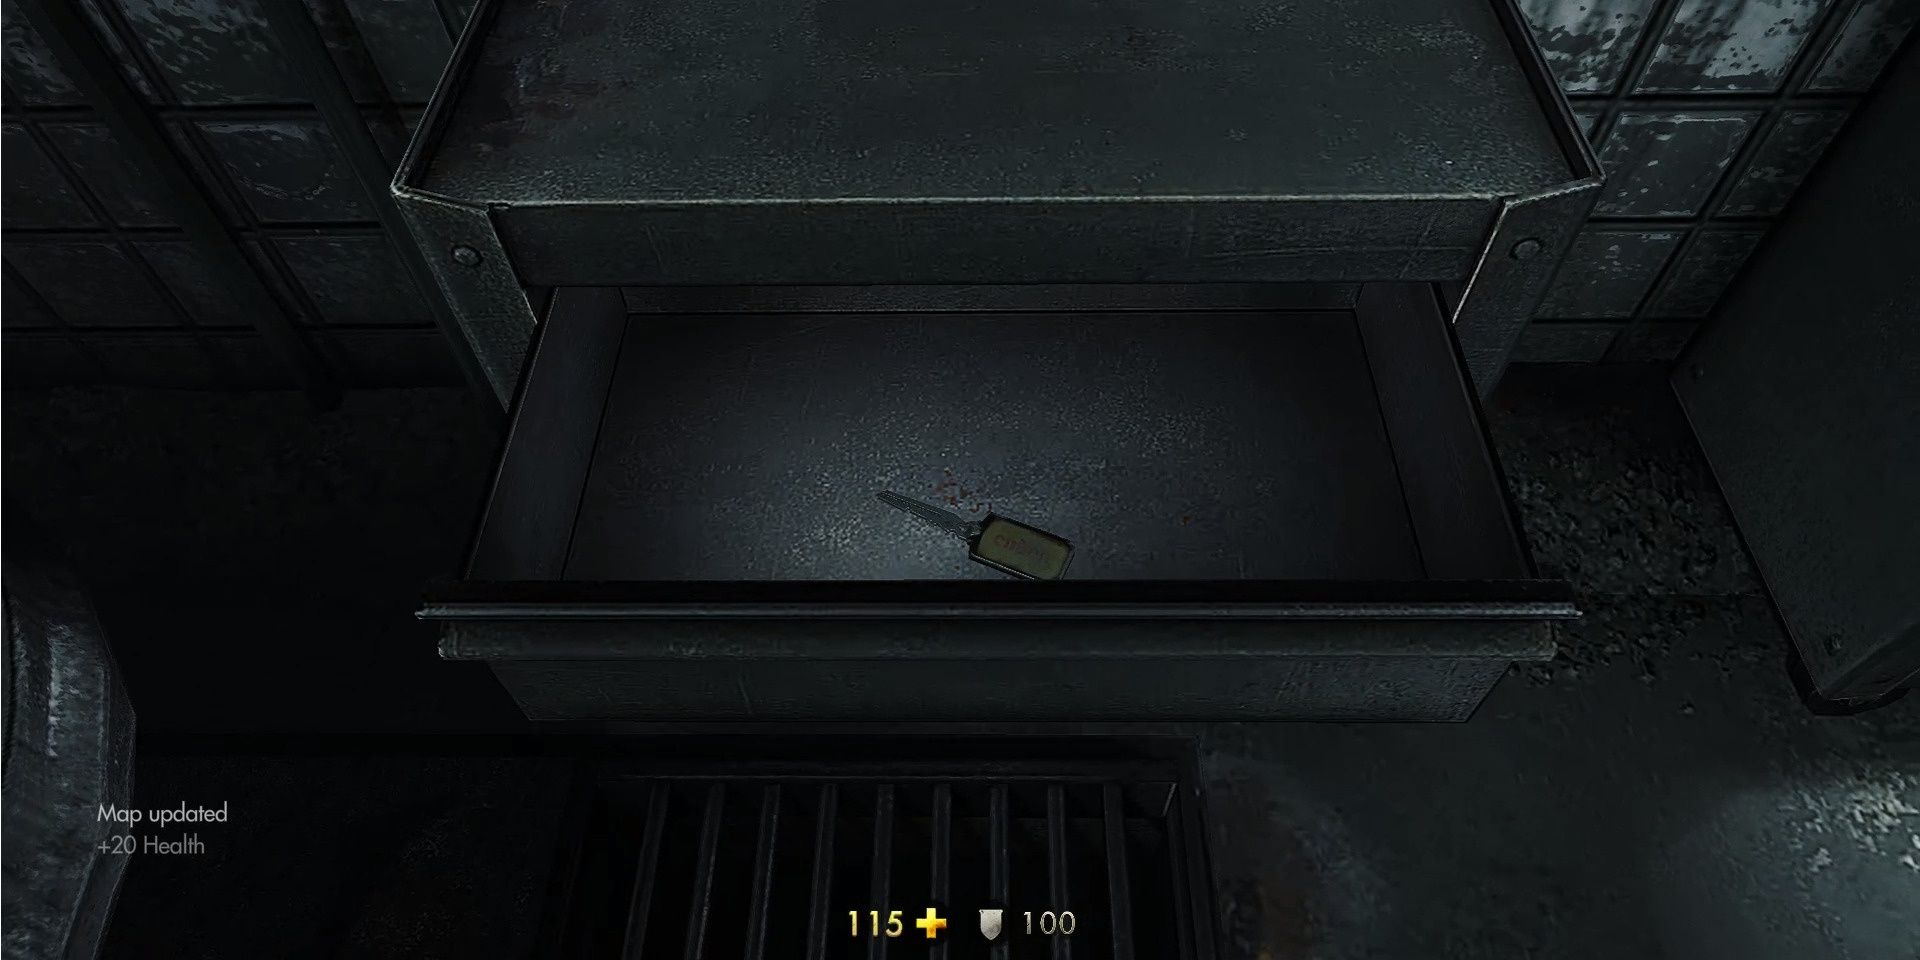 Image of the key to open the room in Wolfenstein: The New Order.